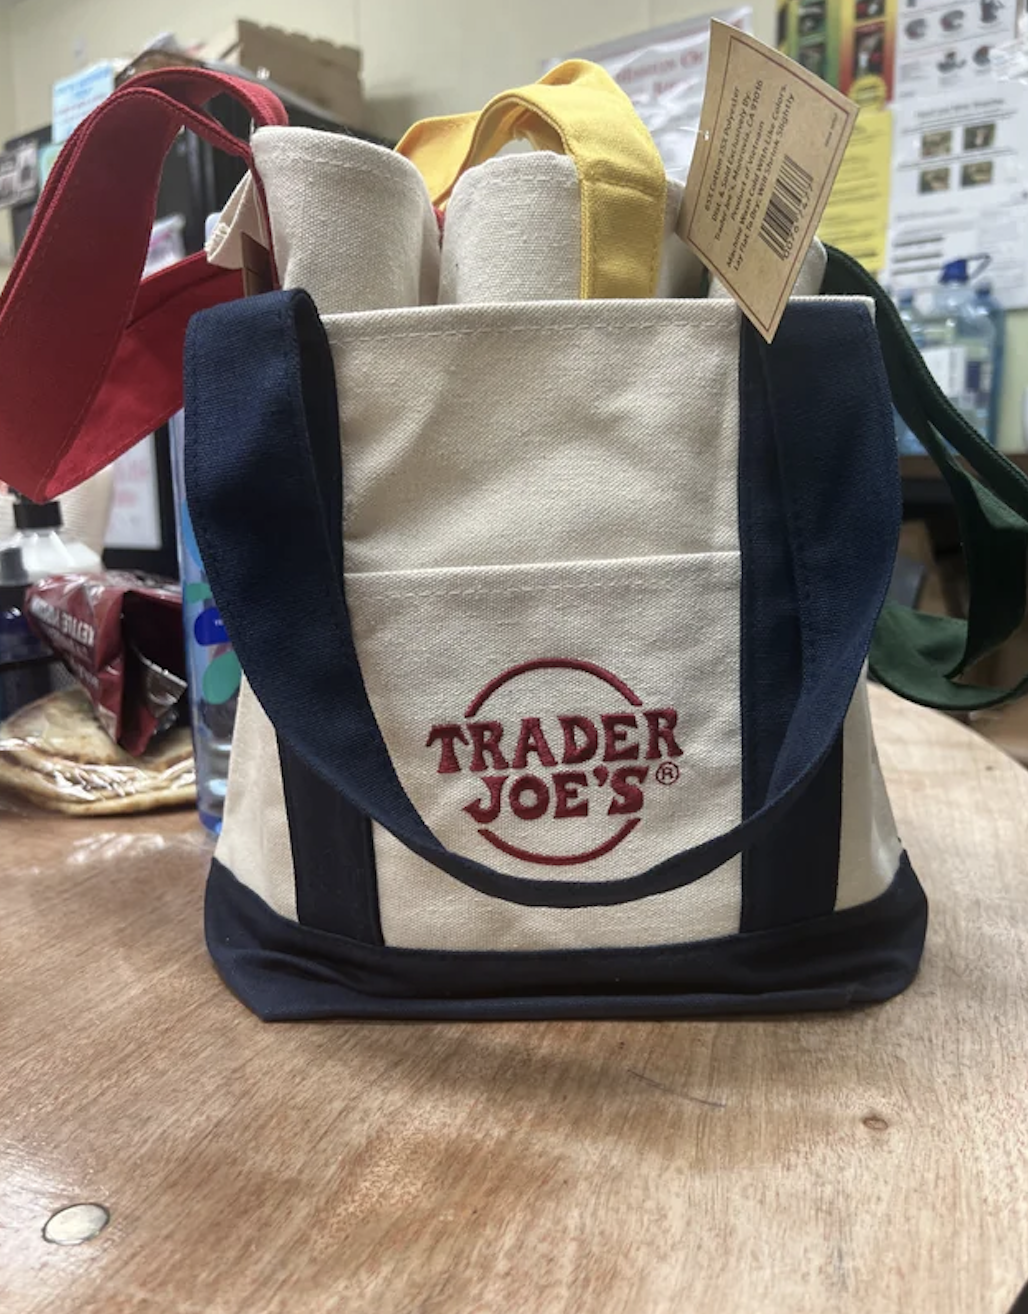 Trader Joe&#x27;s branded canvas grocery bags with various colored handles displayed on a counter